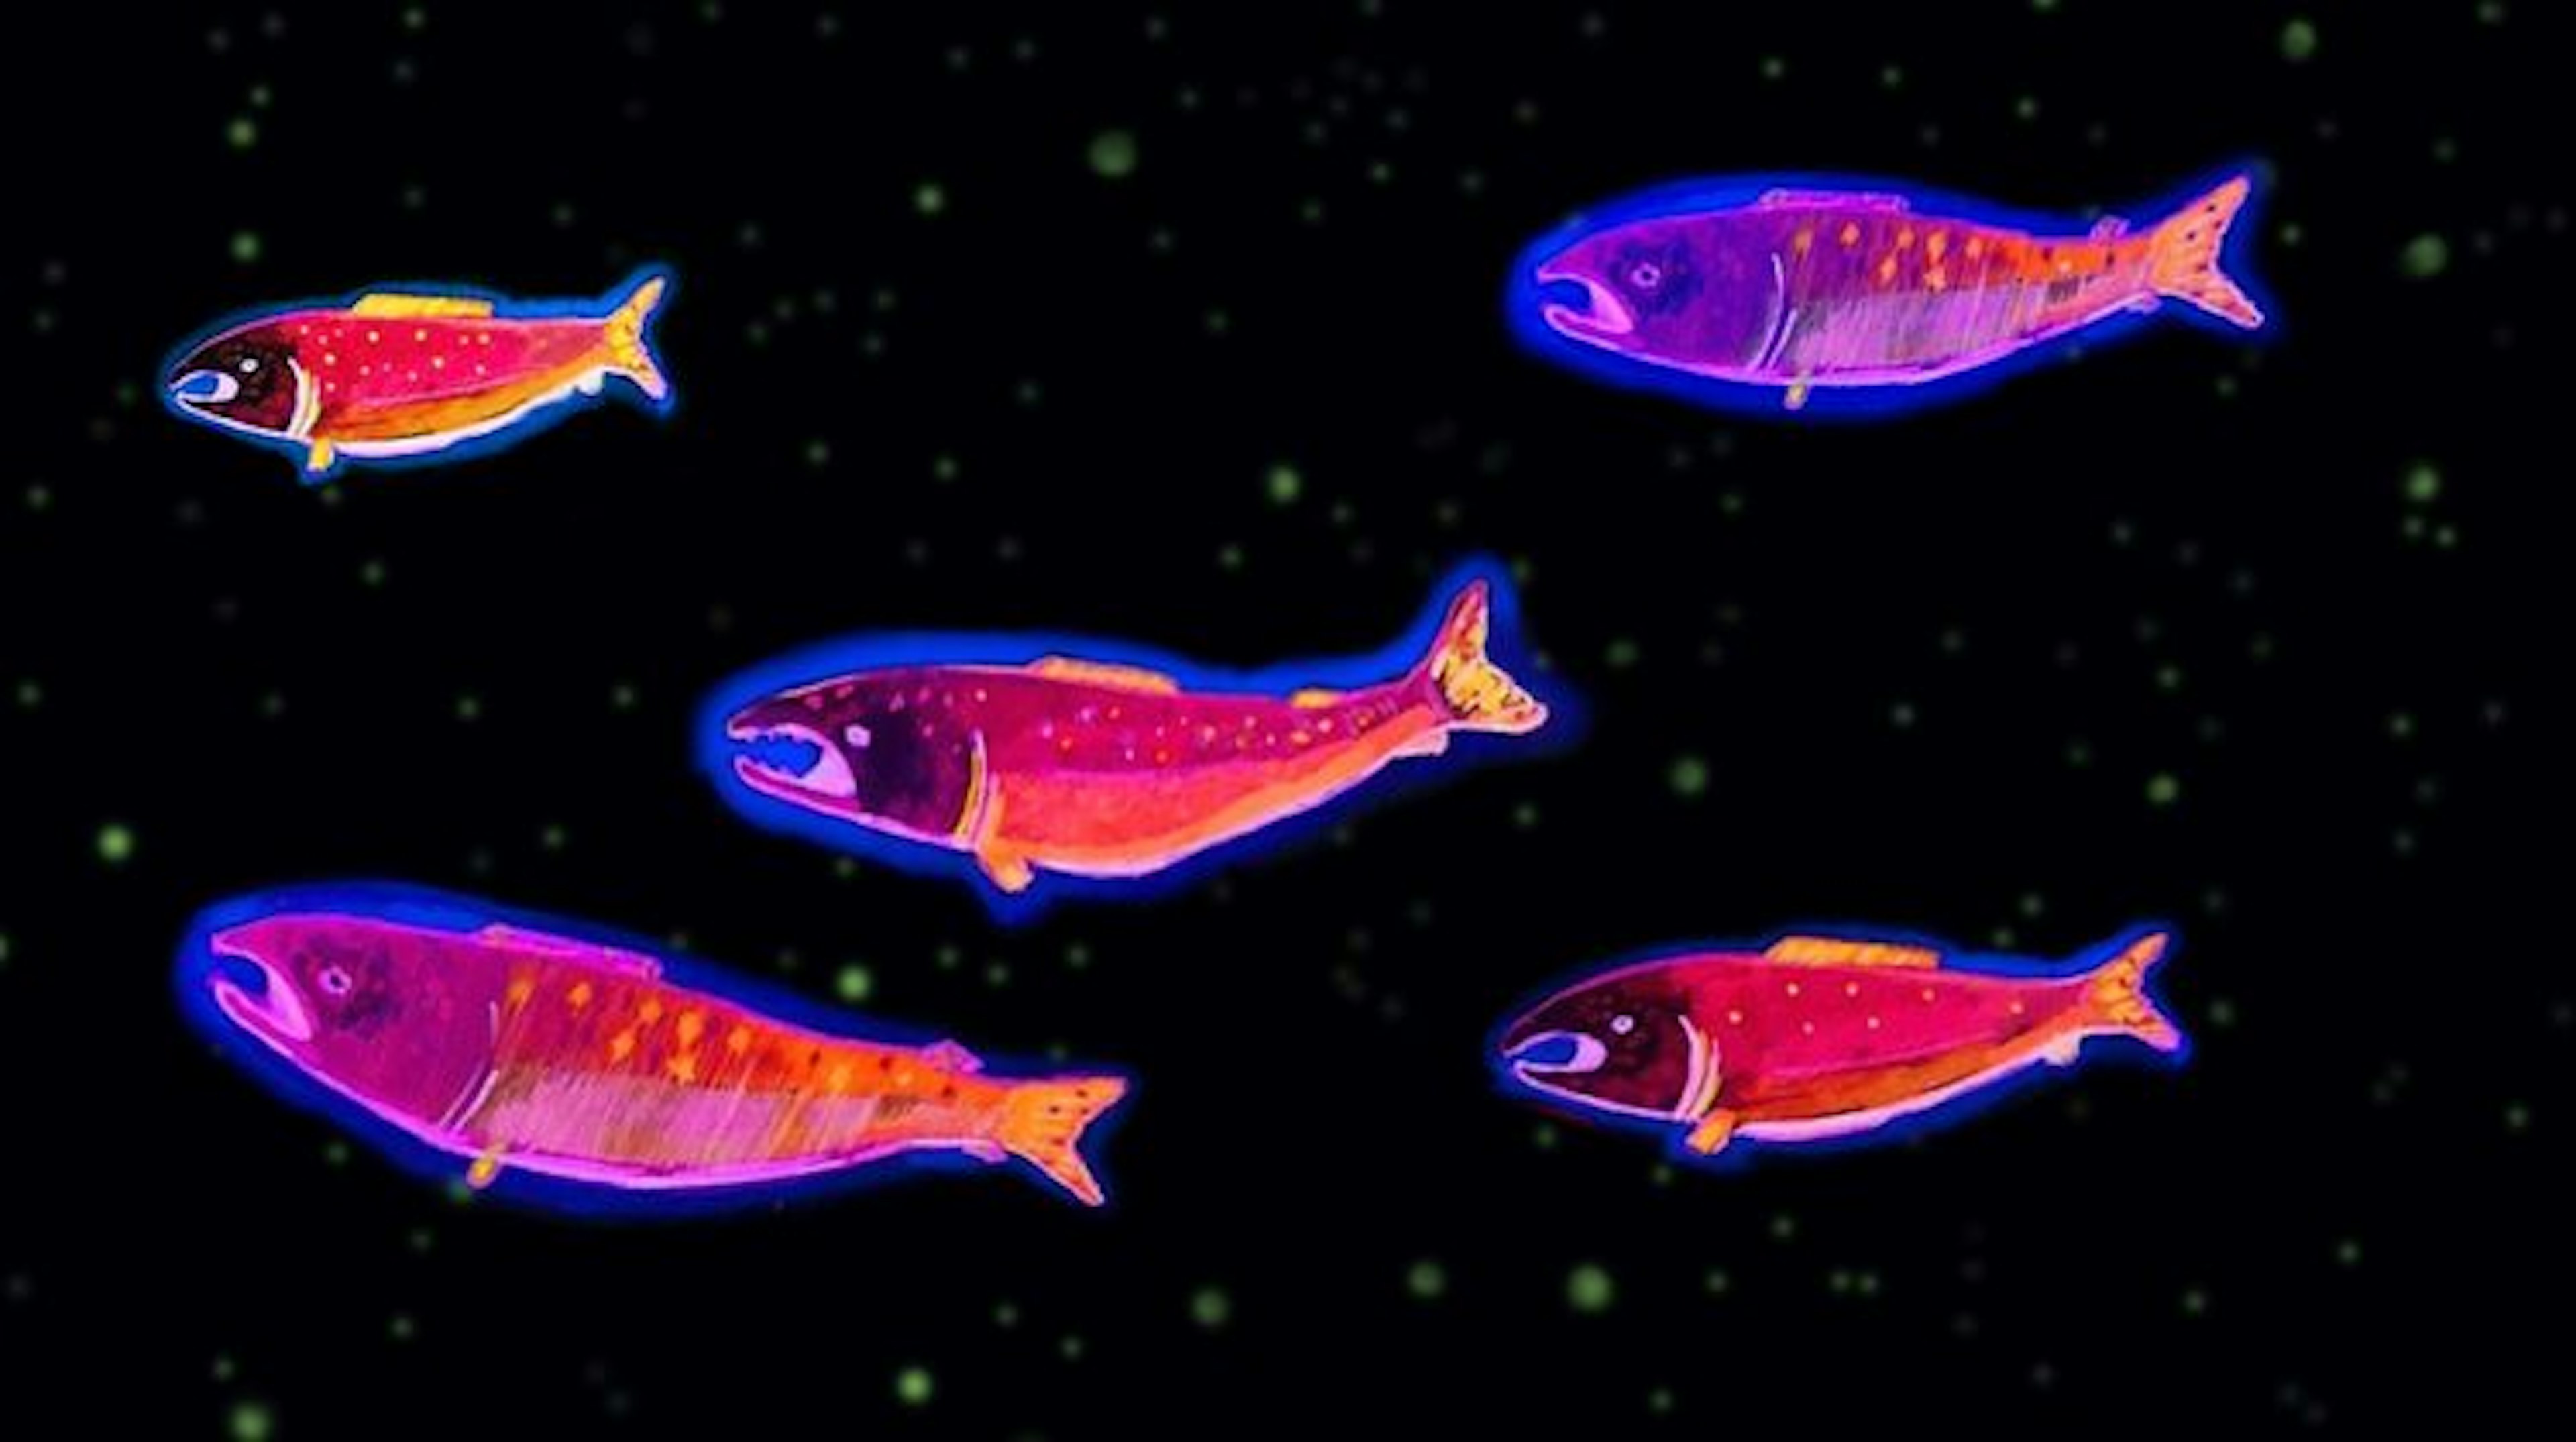 5 hand drawn fish speckled coloured purple, blue and red. They float against a black background with yellow spots placed throughout. 